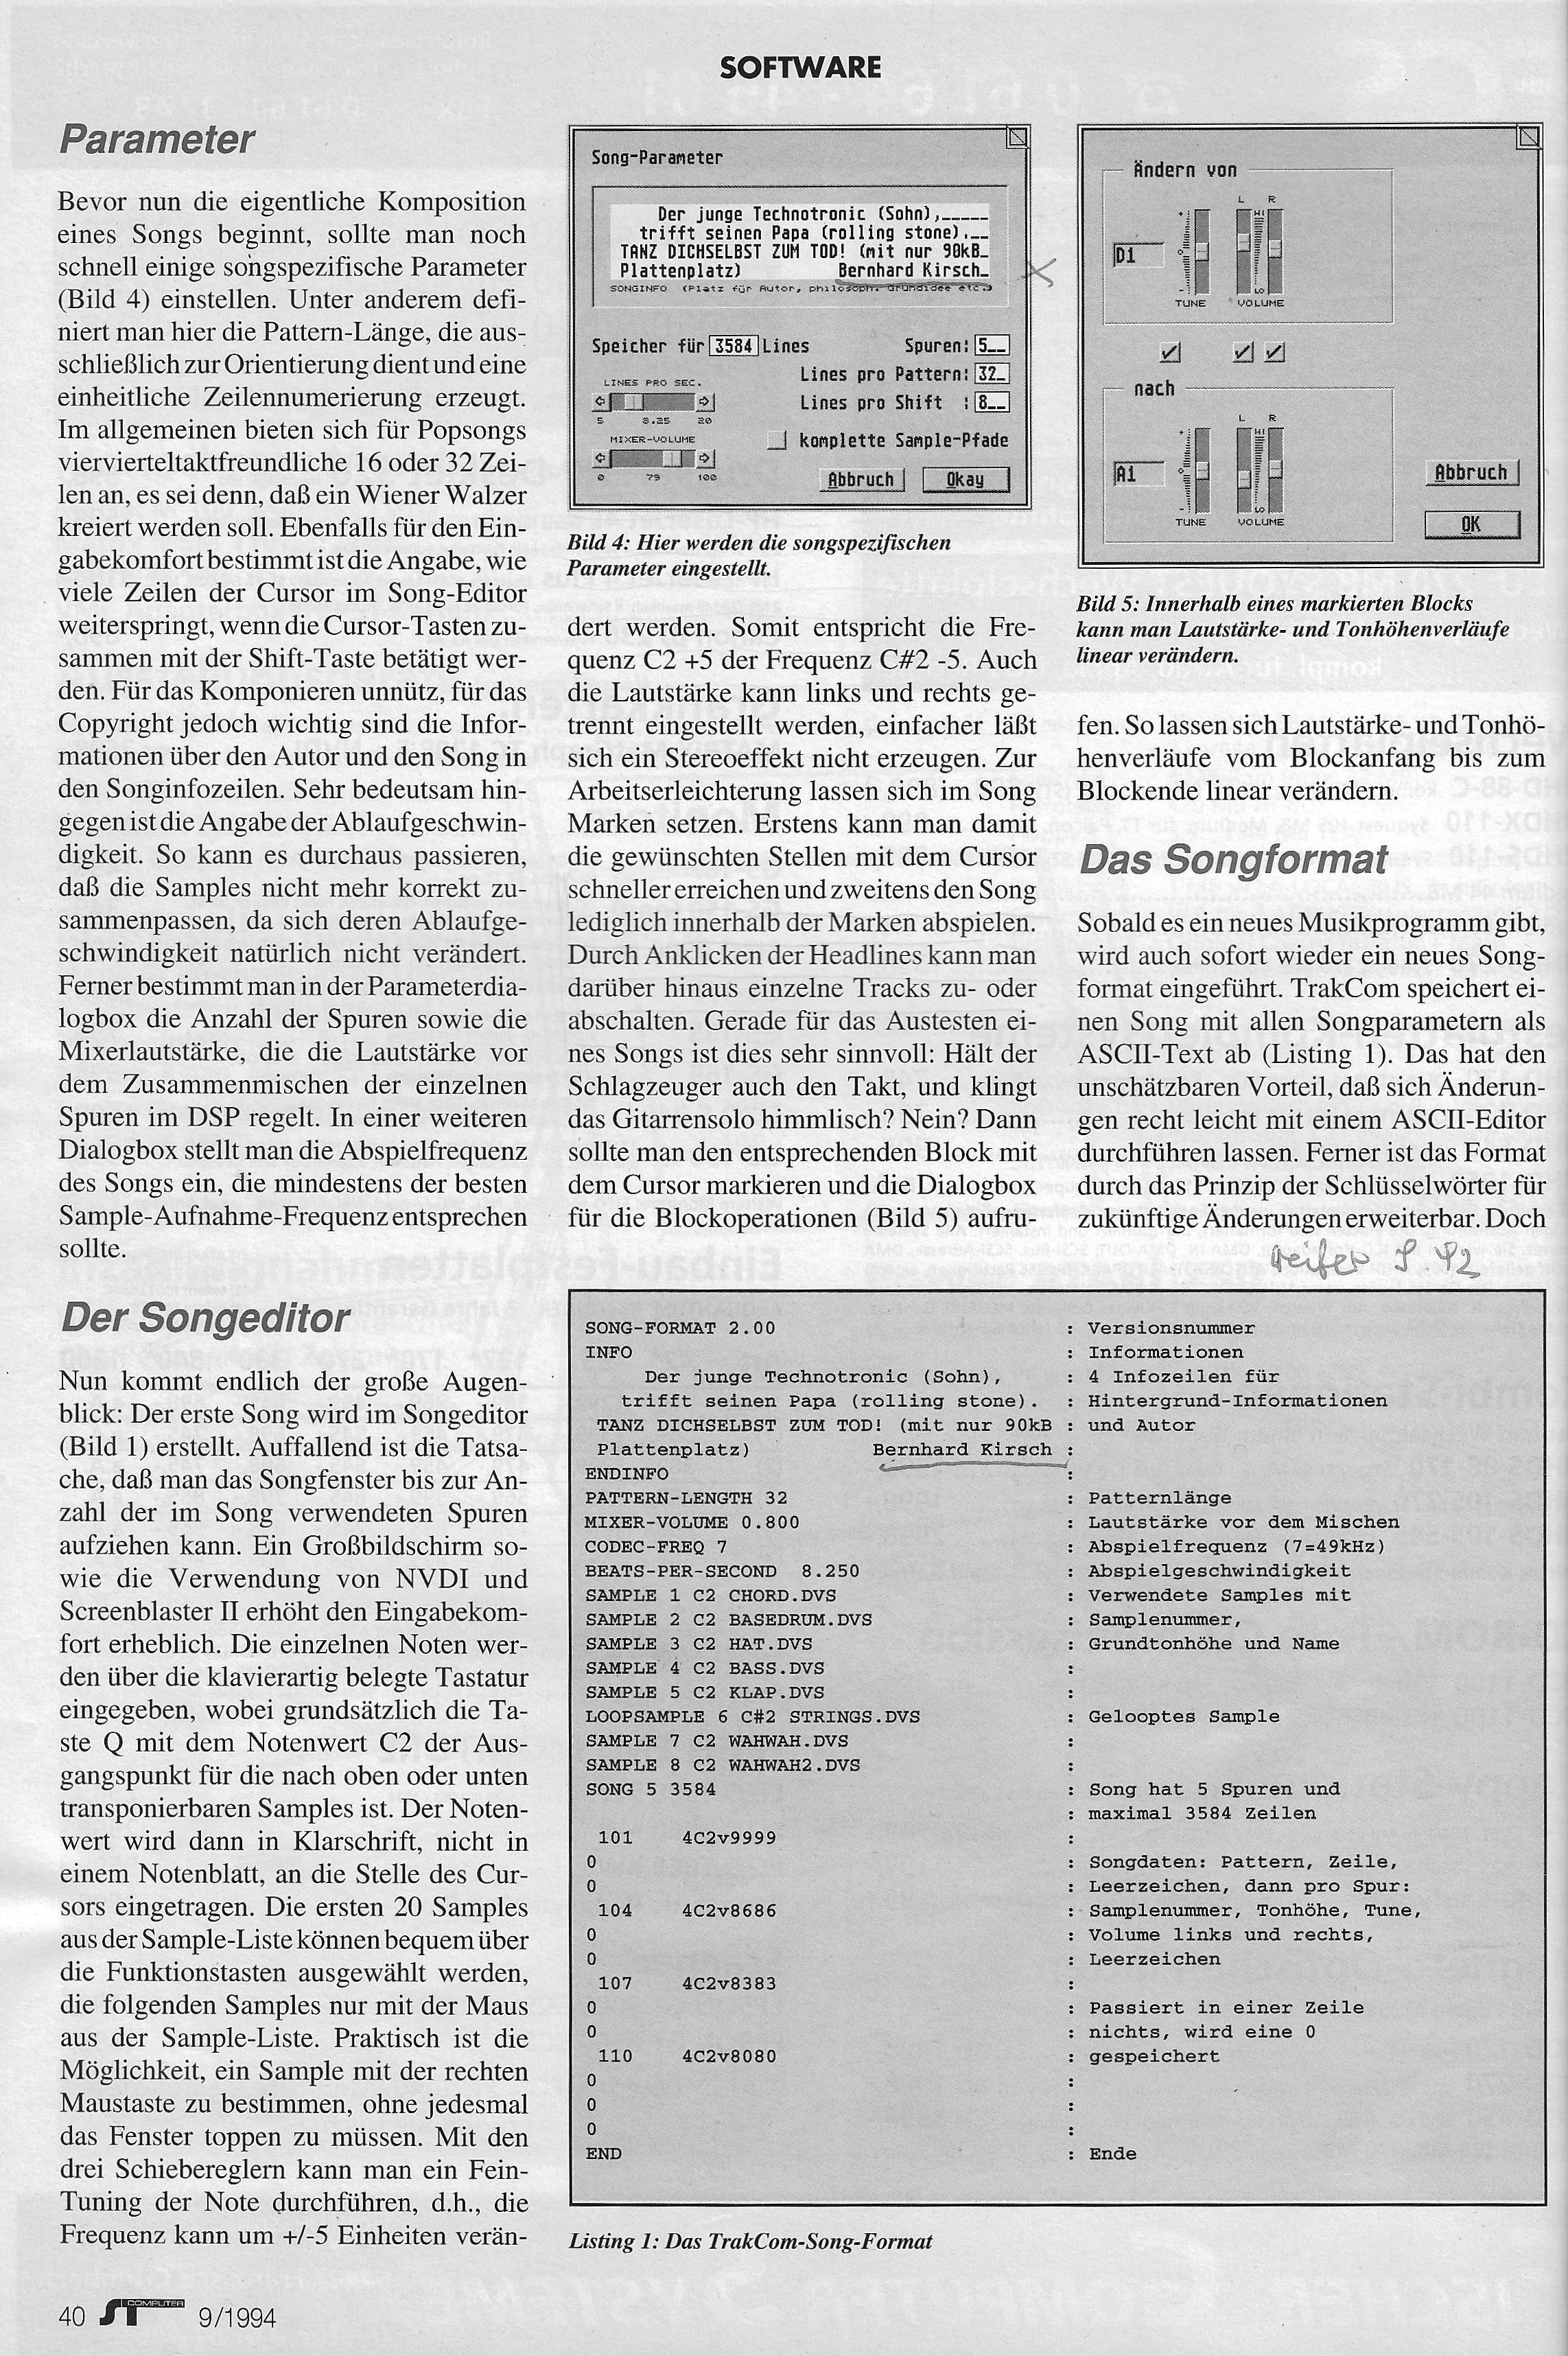 ST Computer issue 09/1994, page 40